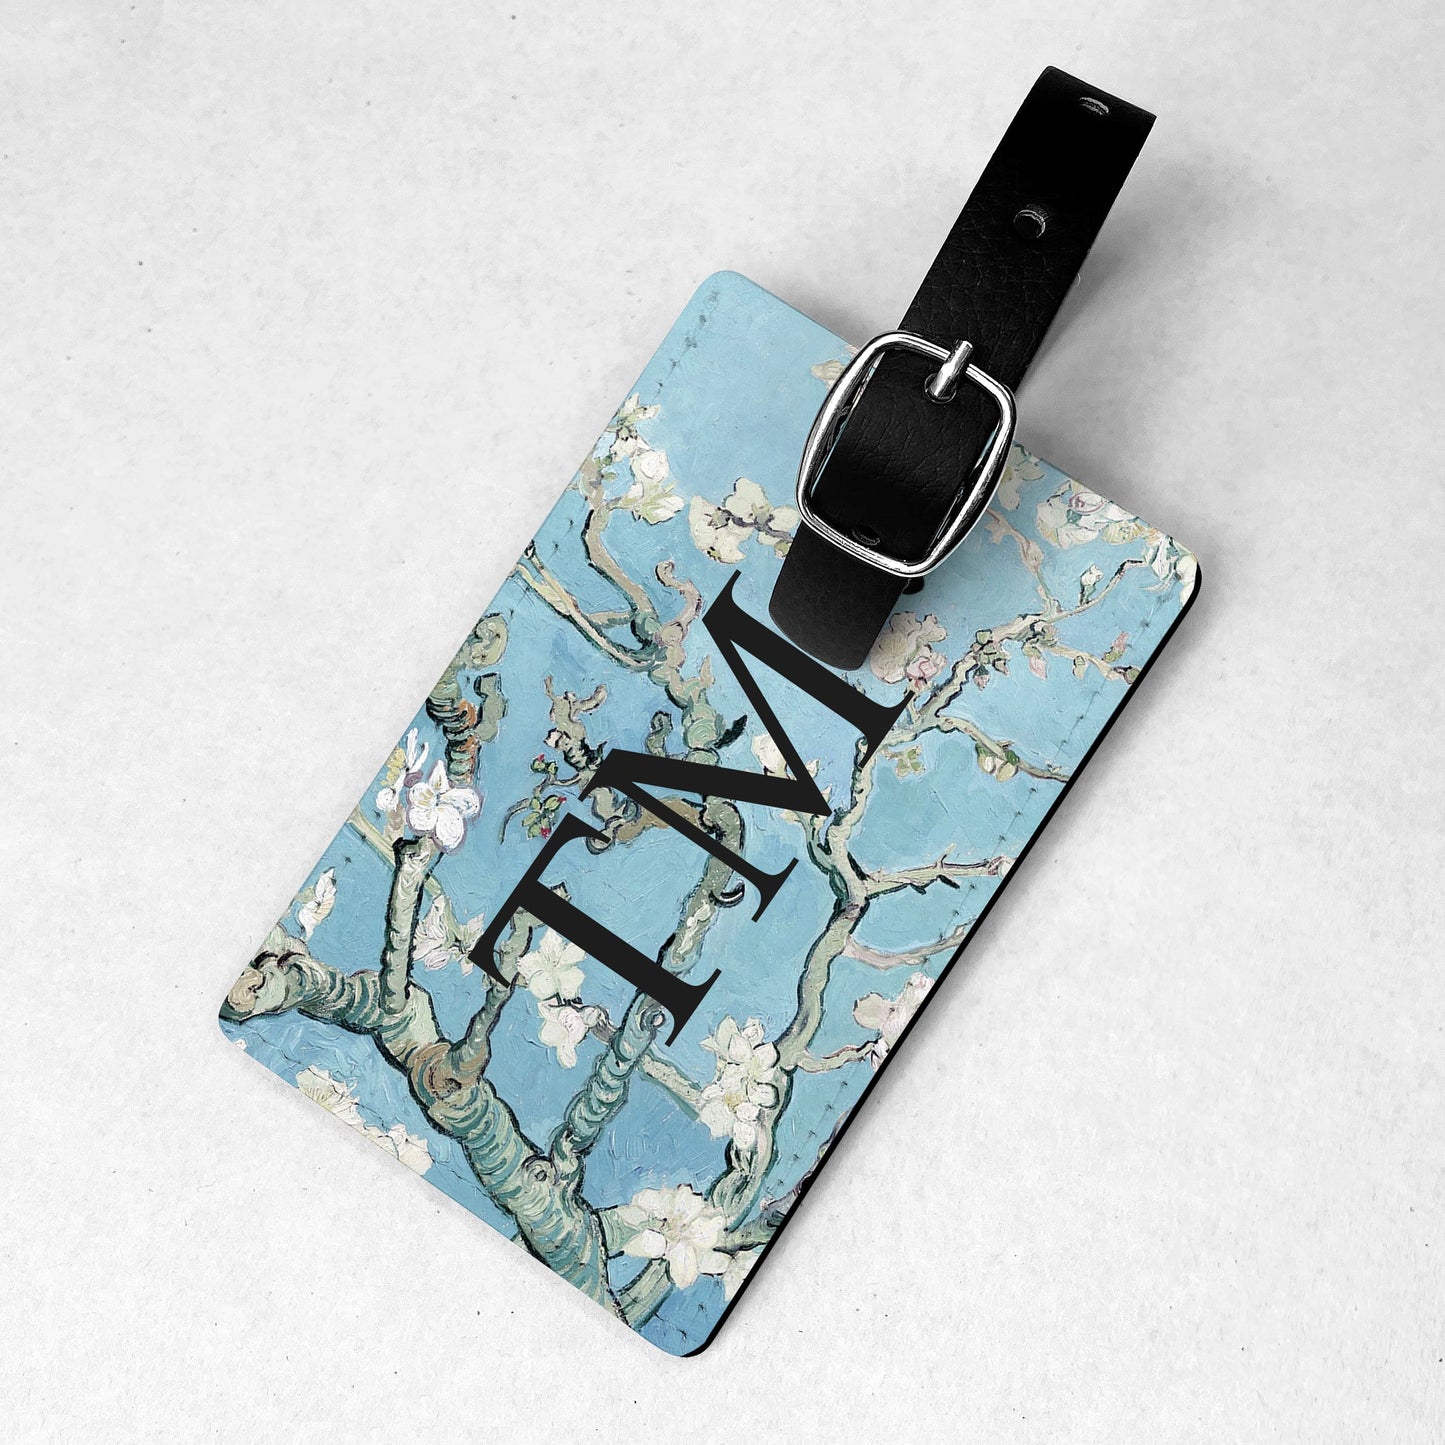 Famous Art Personalised Luggage Tag Almond Blossom luggage tag